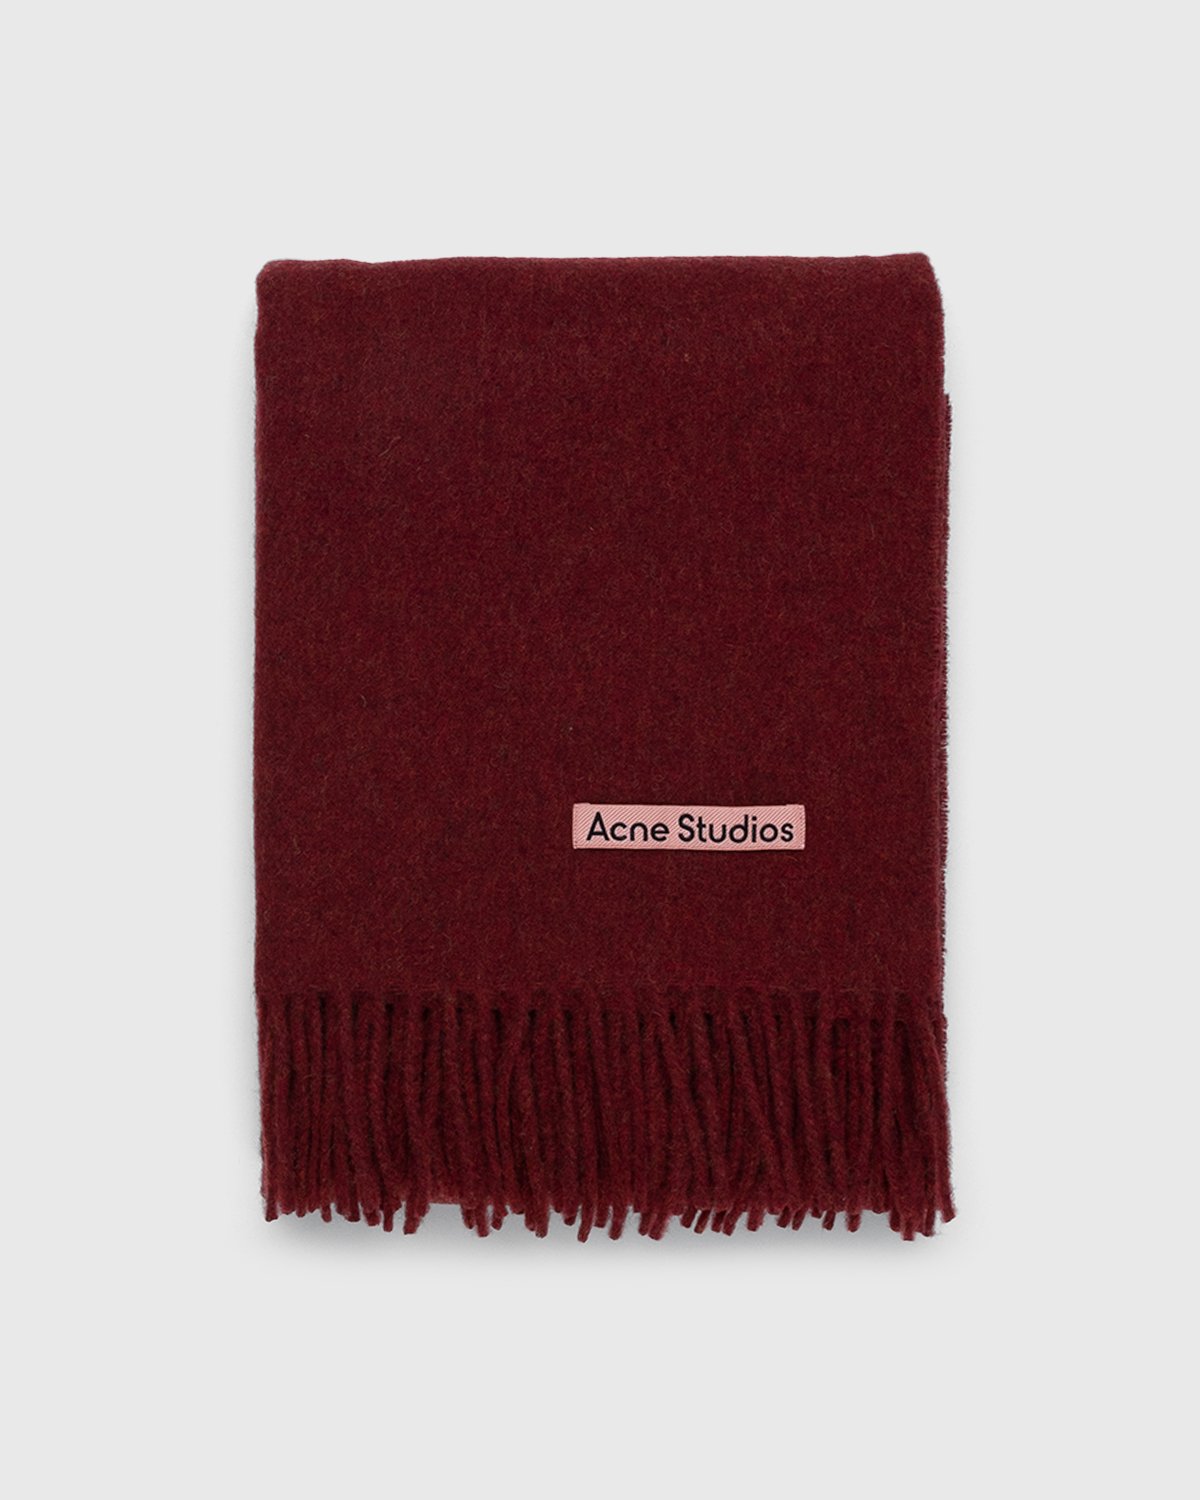 Acne Studios - Canada Narrow Scarf Red Melange - Accessories - Red - Image 2